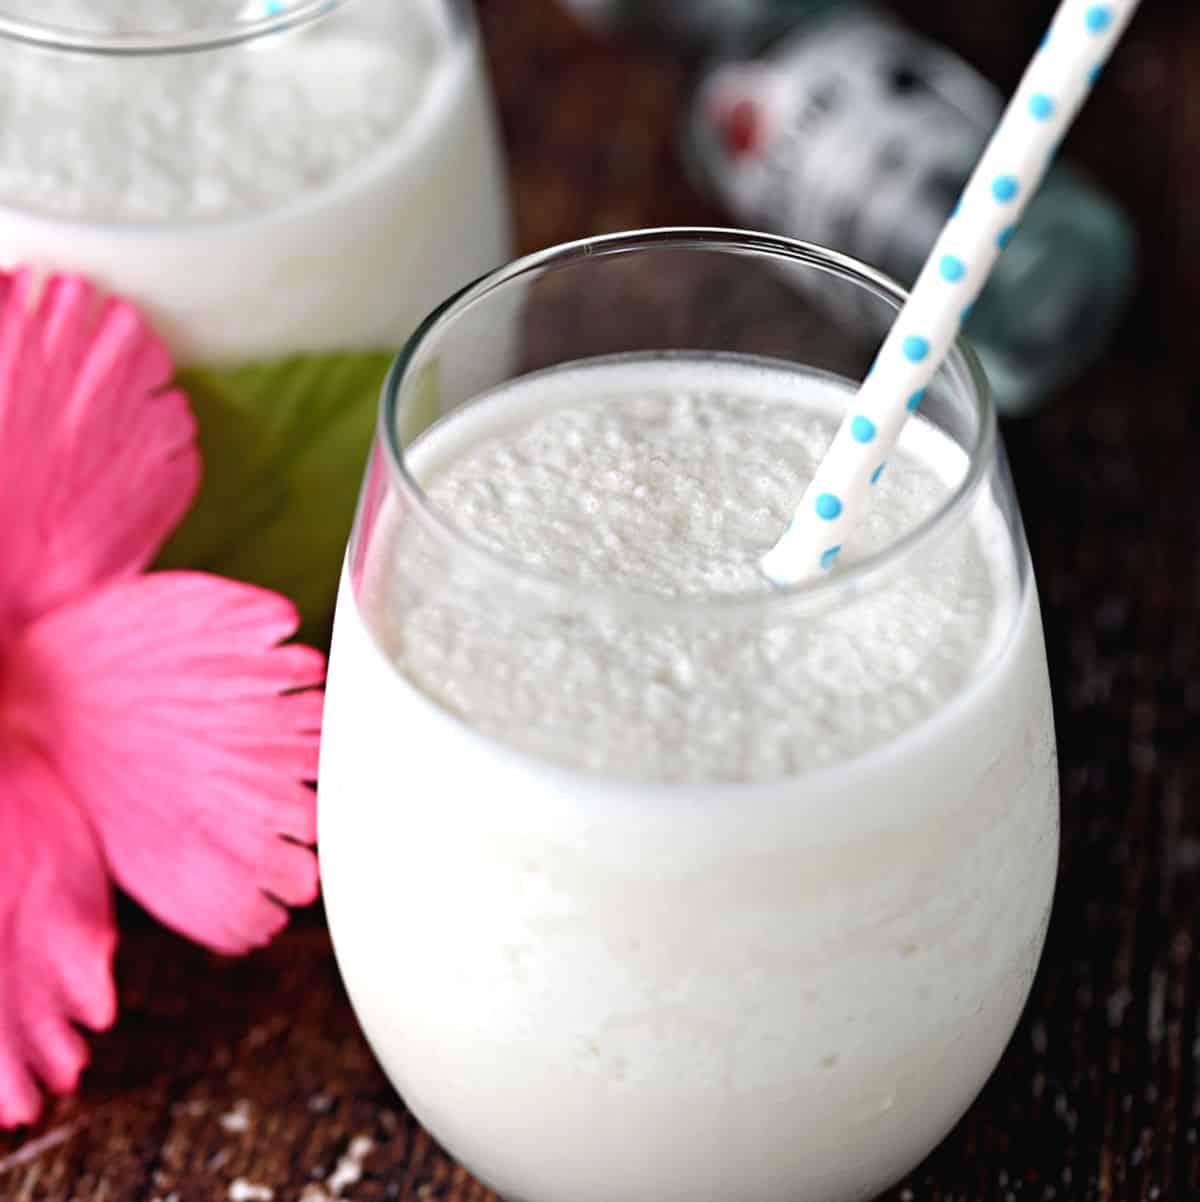 A creamy Keto Pina Colada with Coconut Milk in a glass with a blue polka dot straw with a second cocktail and a pink flower in the background.